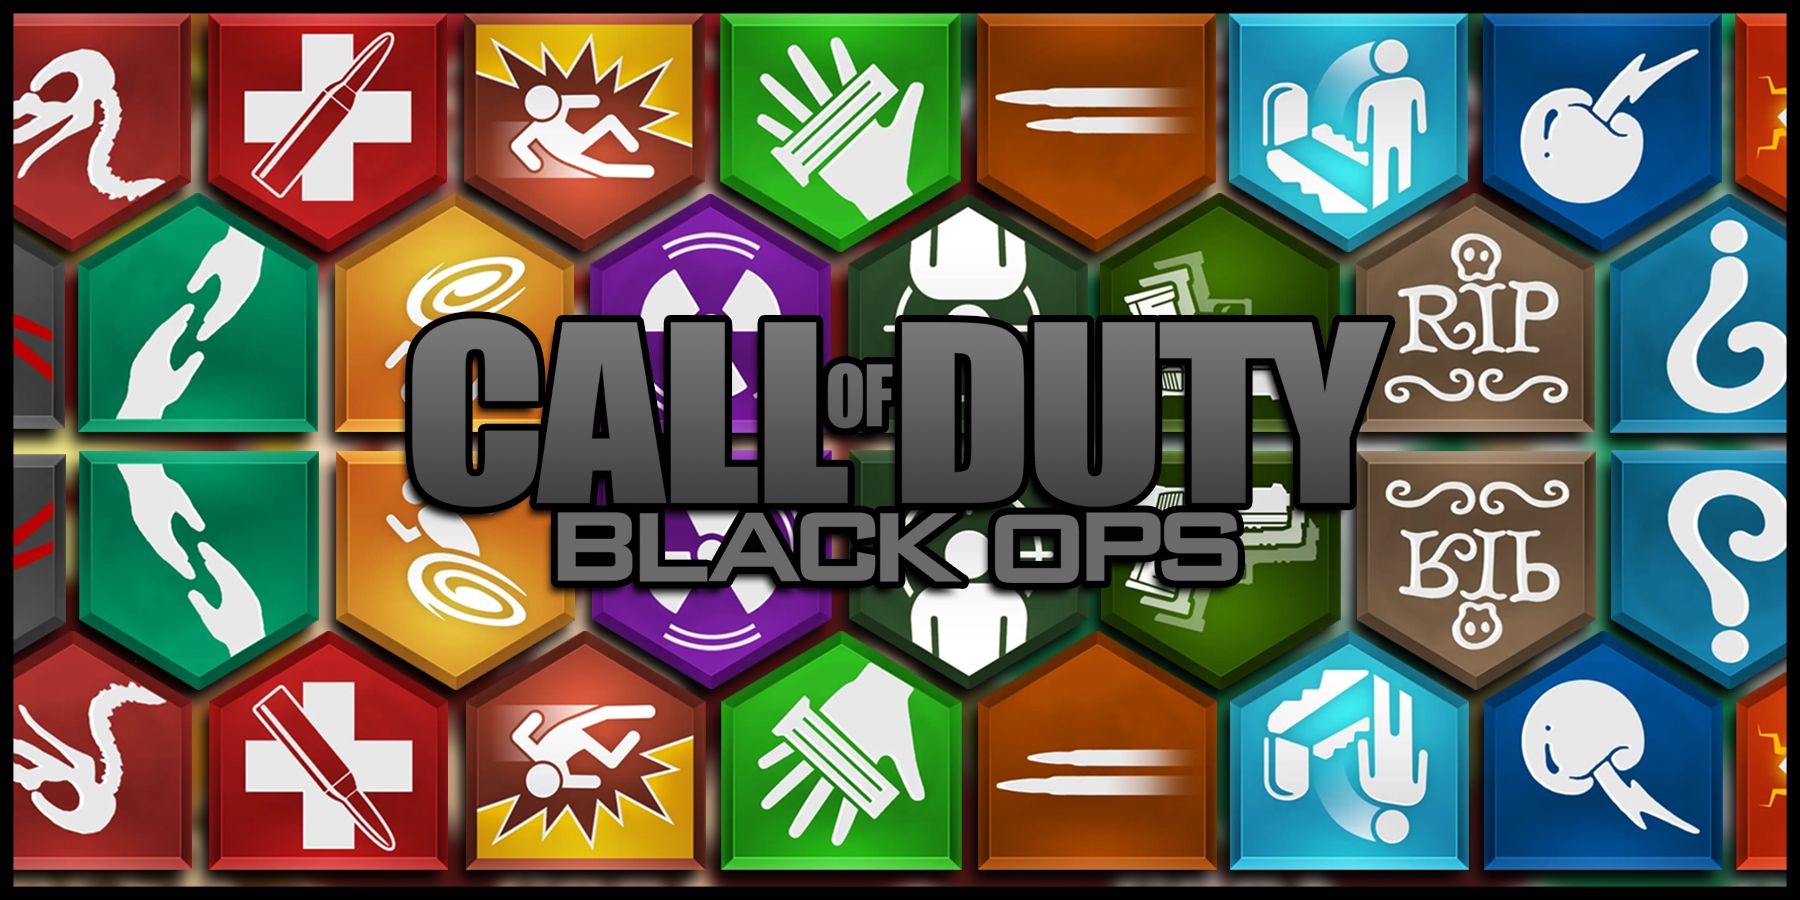 bouncing betty black ops 2